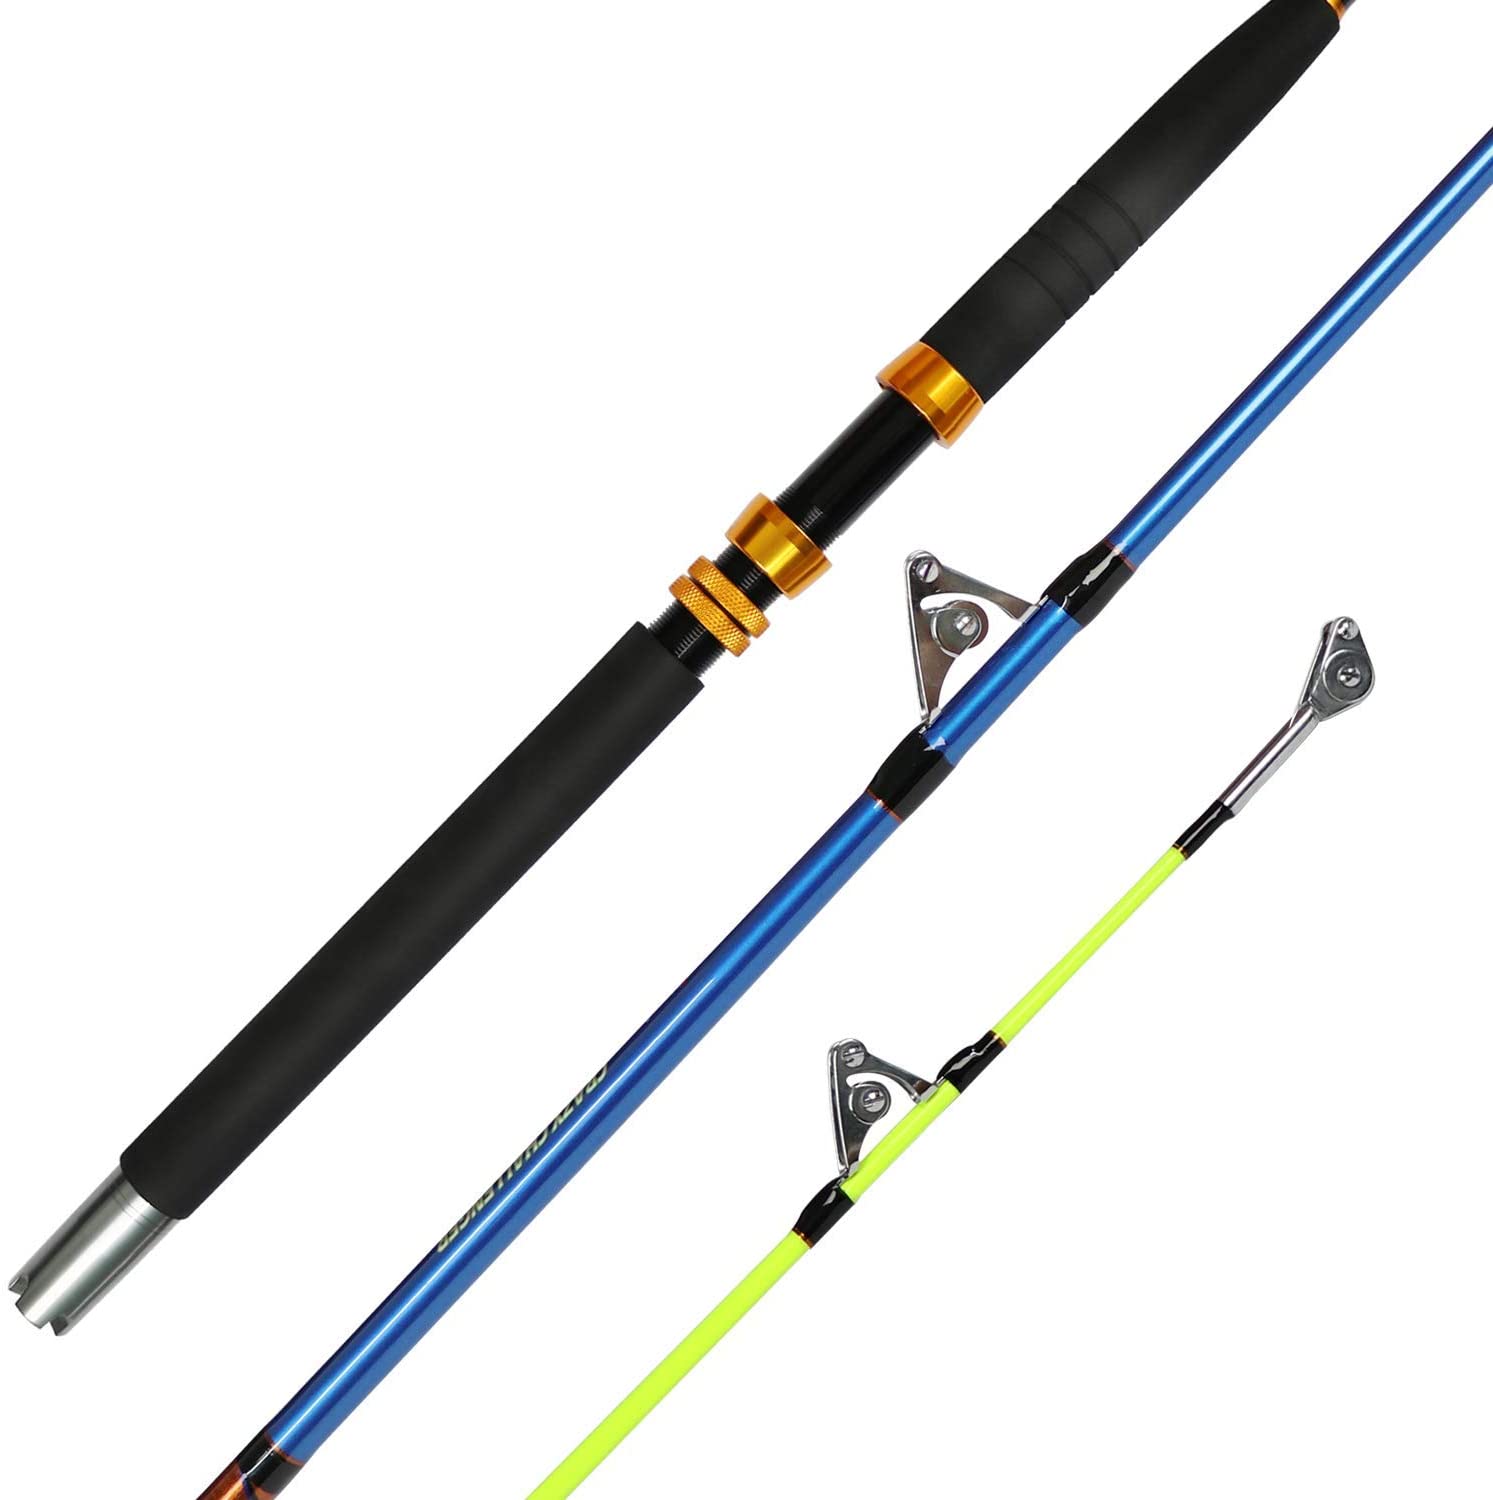 Heavy 2-Piece 6' Conventional/Casting Fishing Rod